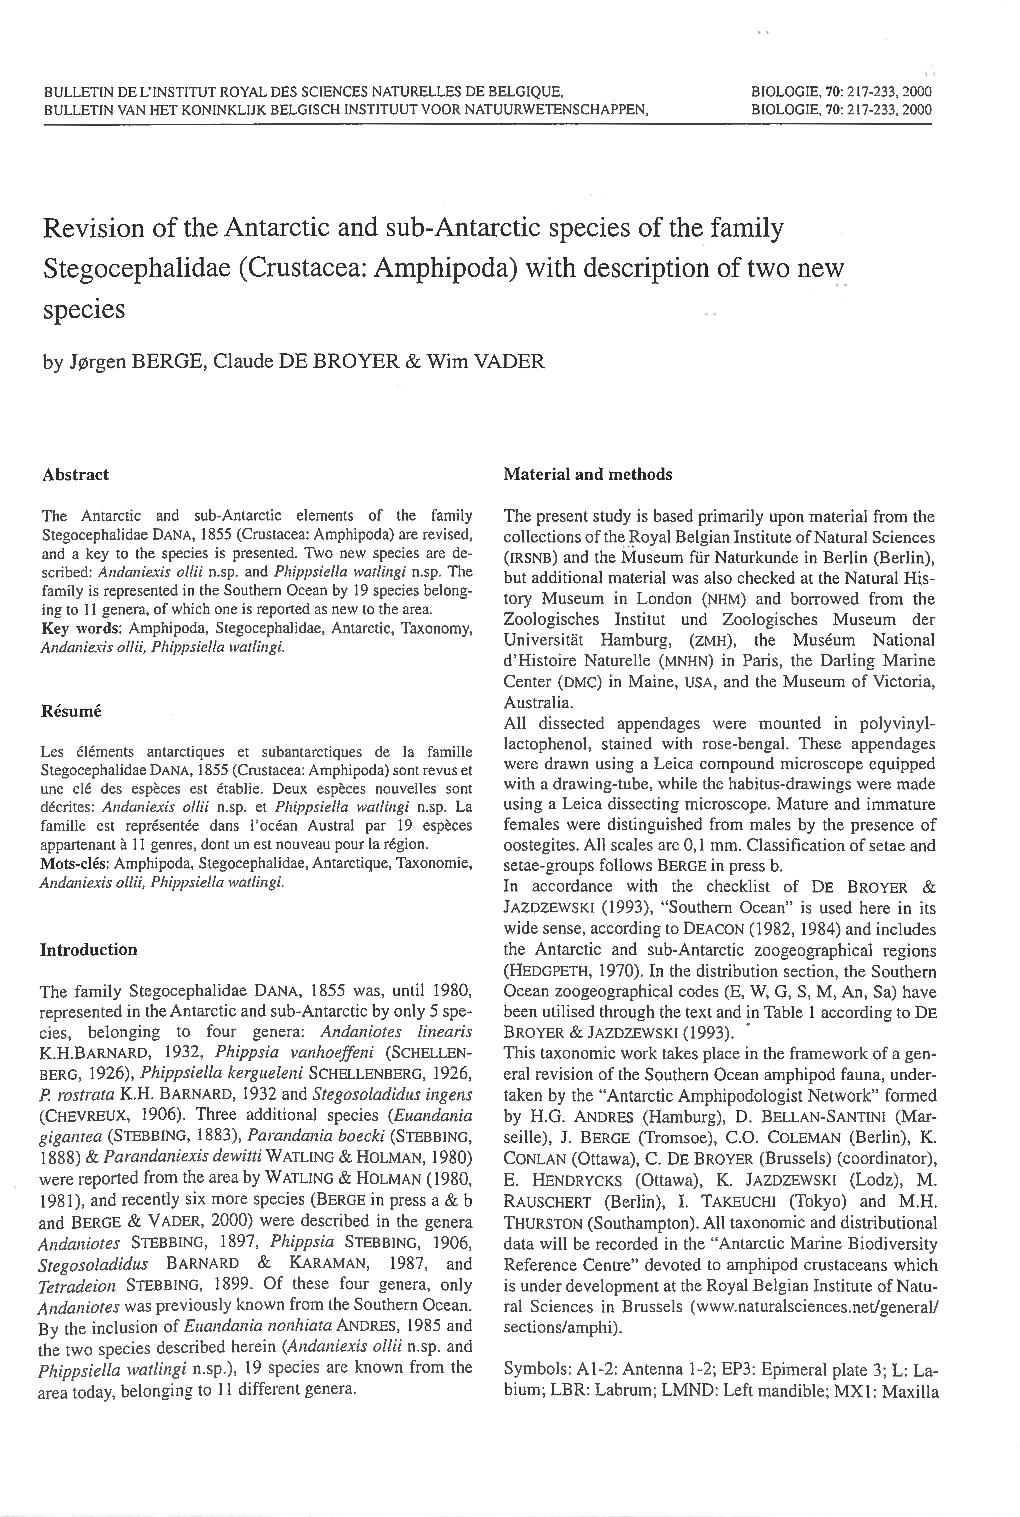 Revision of the Antarctic and Sub-Antarctic Species of the Family Stegocephalidae (Crustacea: Amphipoda) with Description of Two New